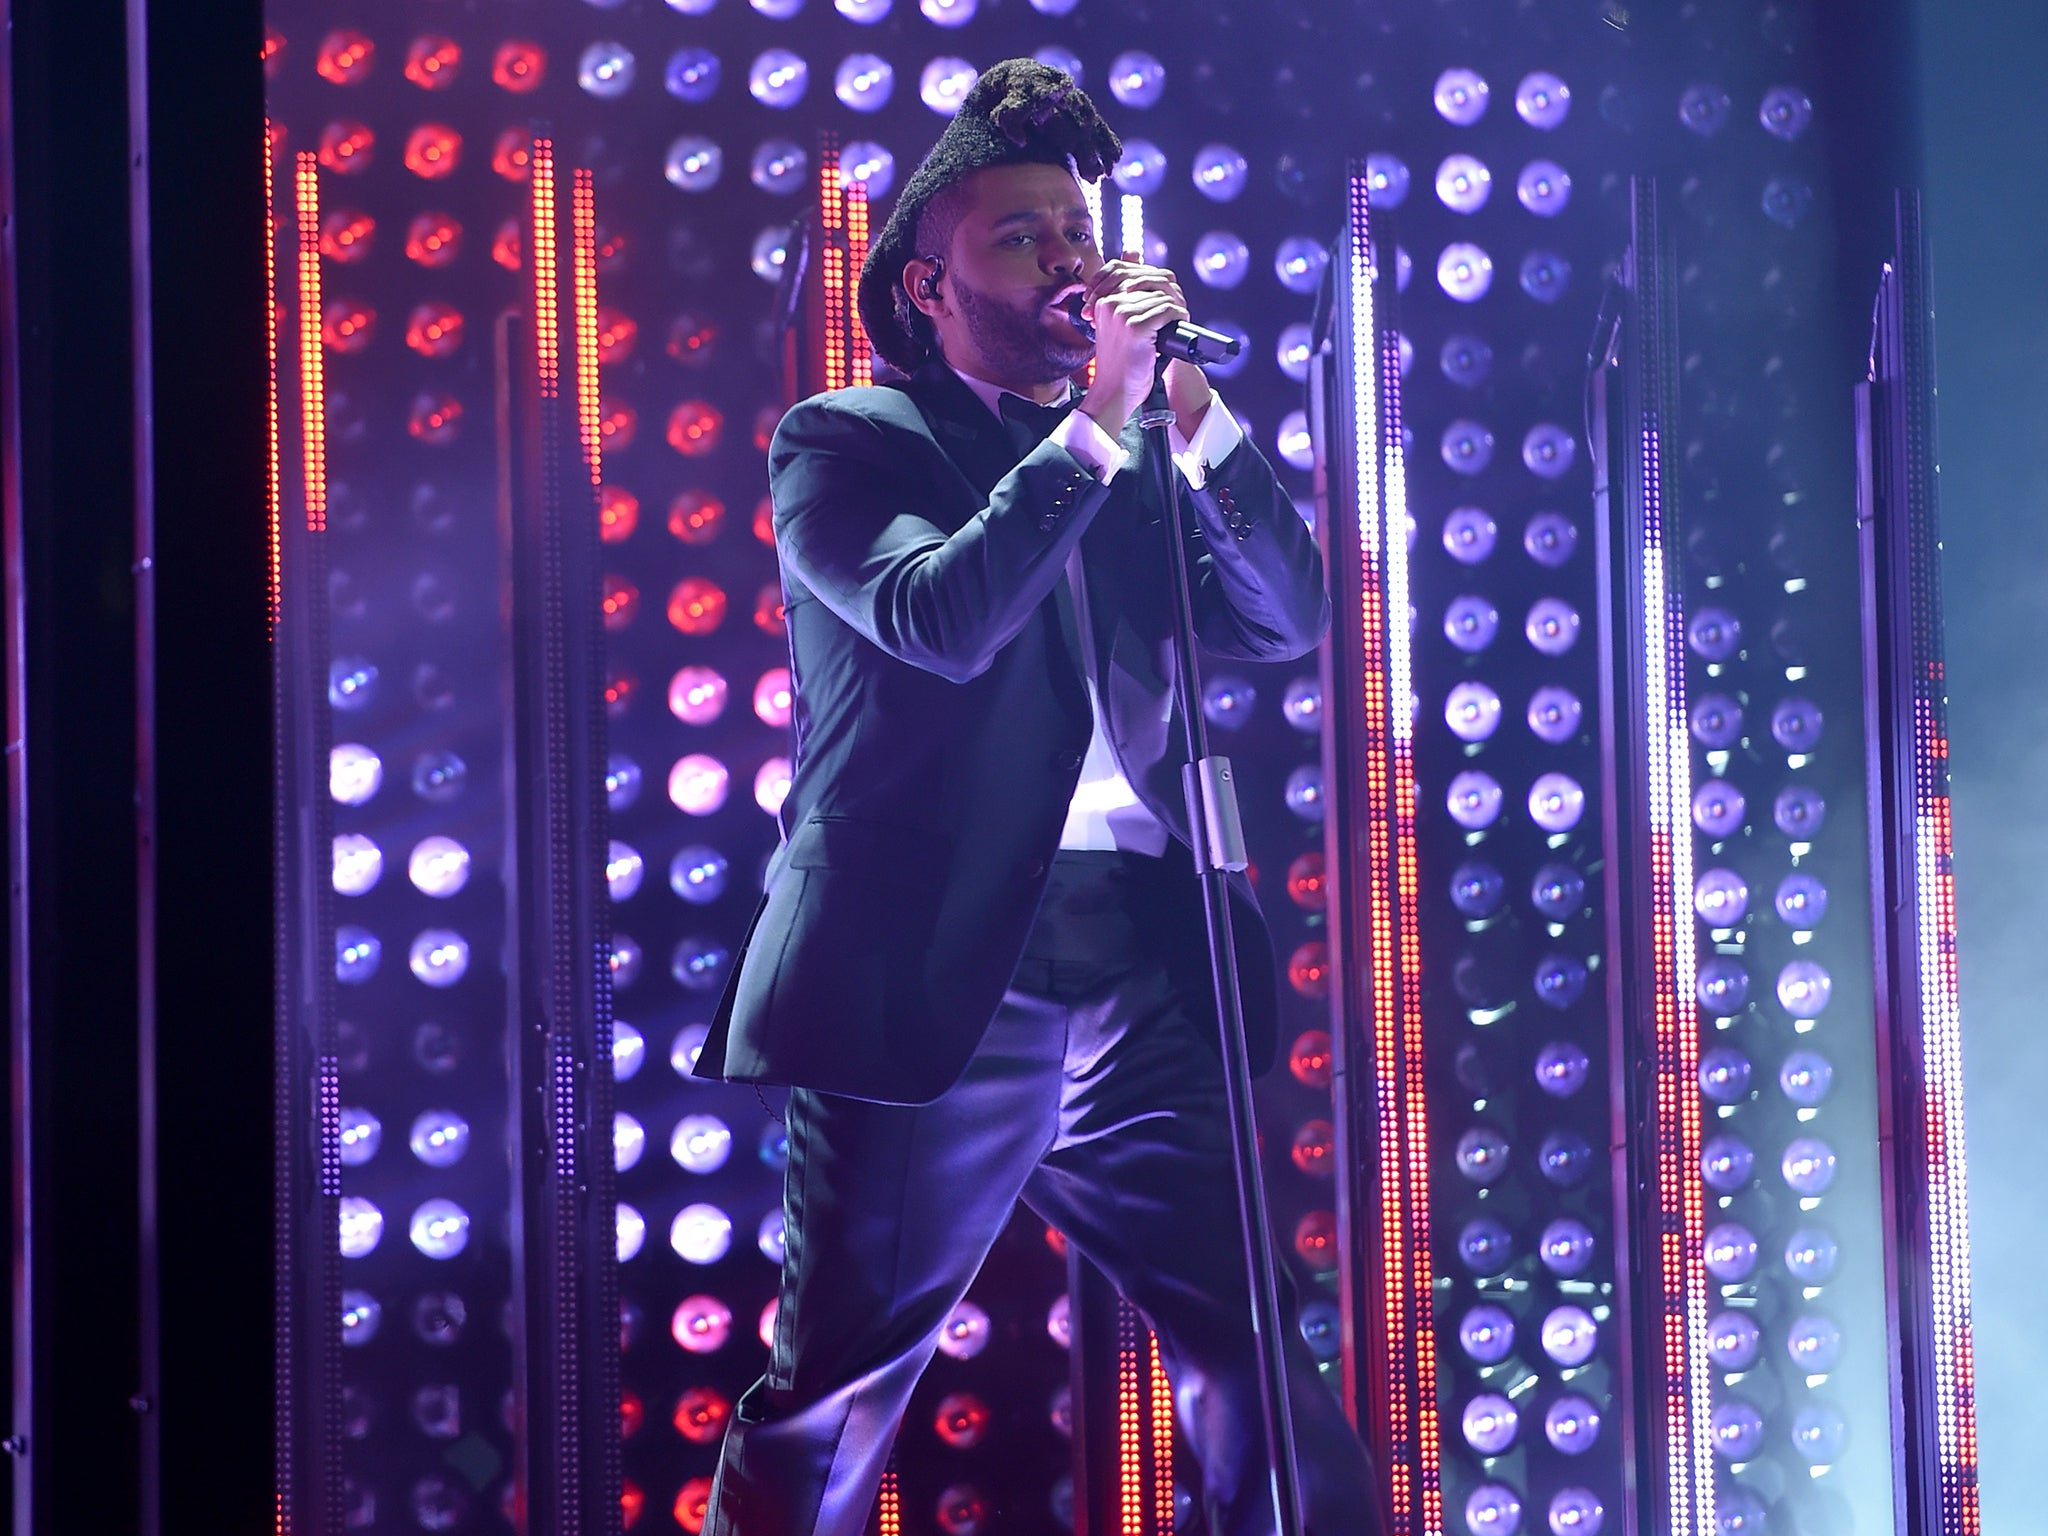 Musician The Weeknd performs at the Grammys